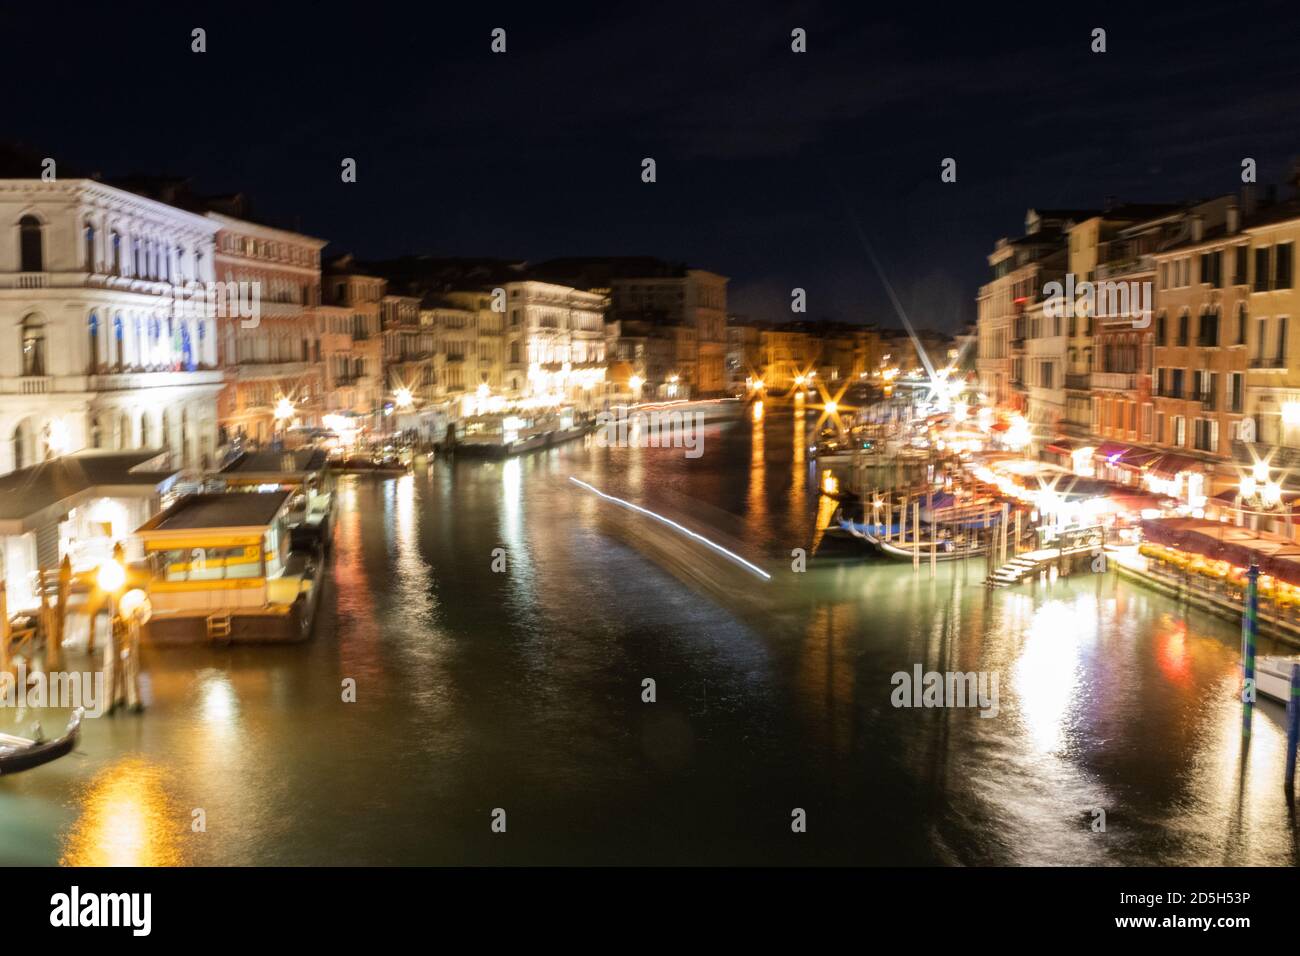 View of the Grand Canal shimmering whilst water taxis sail on it at night time Stock Photo